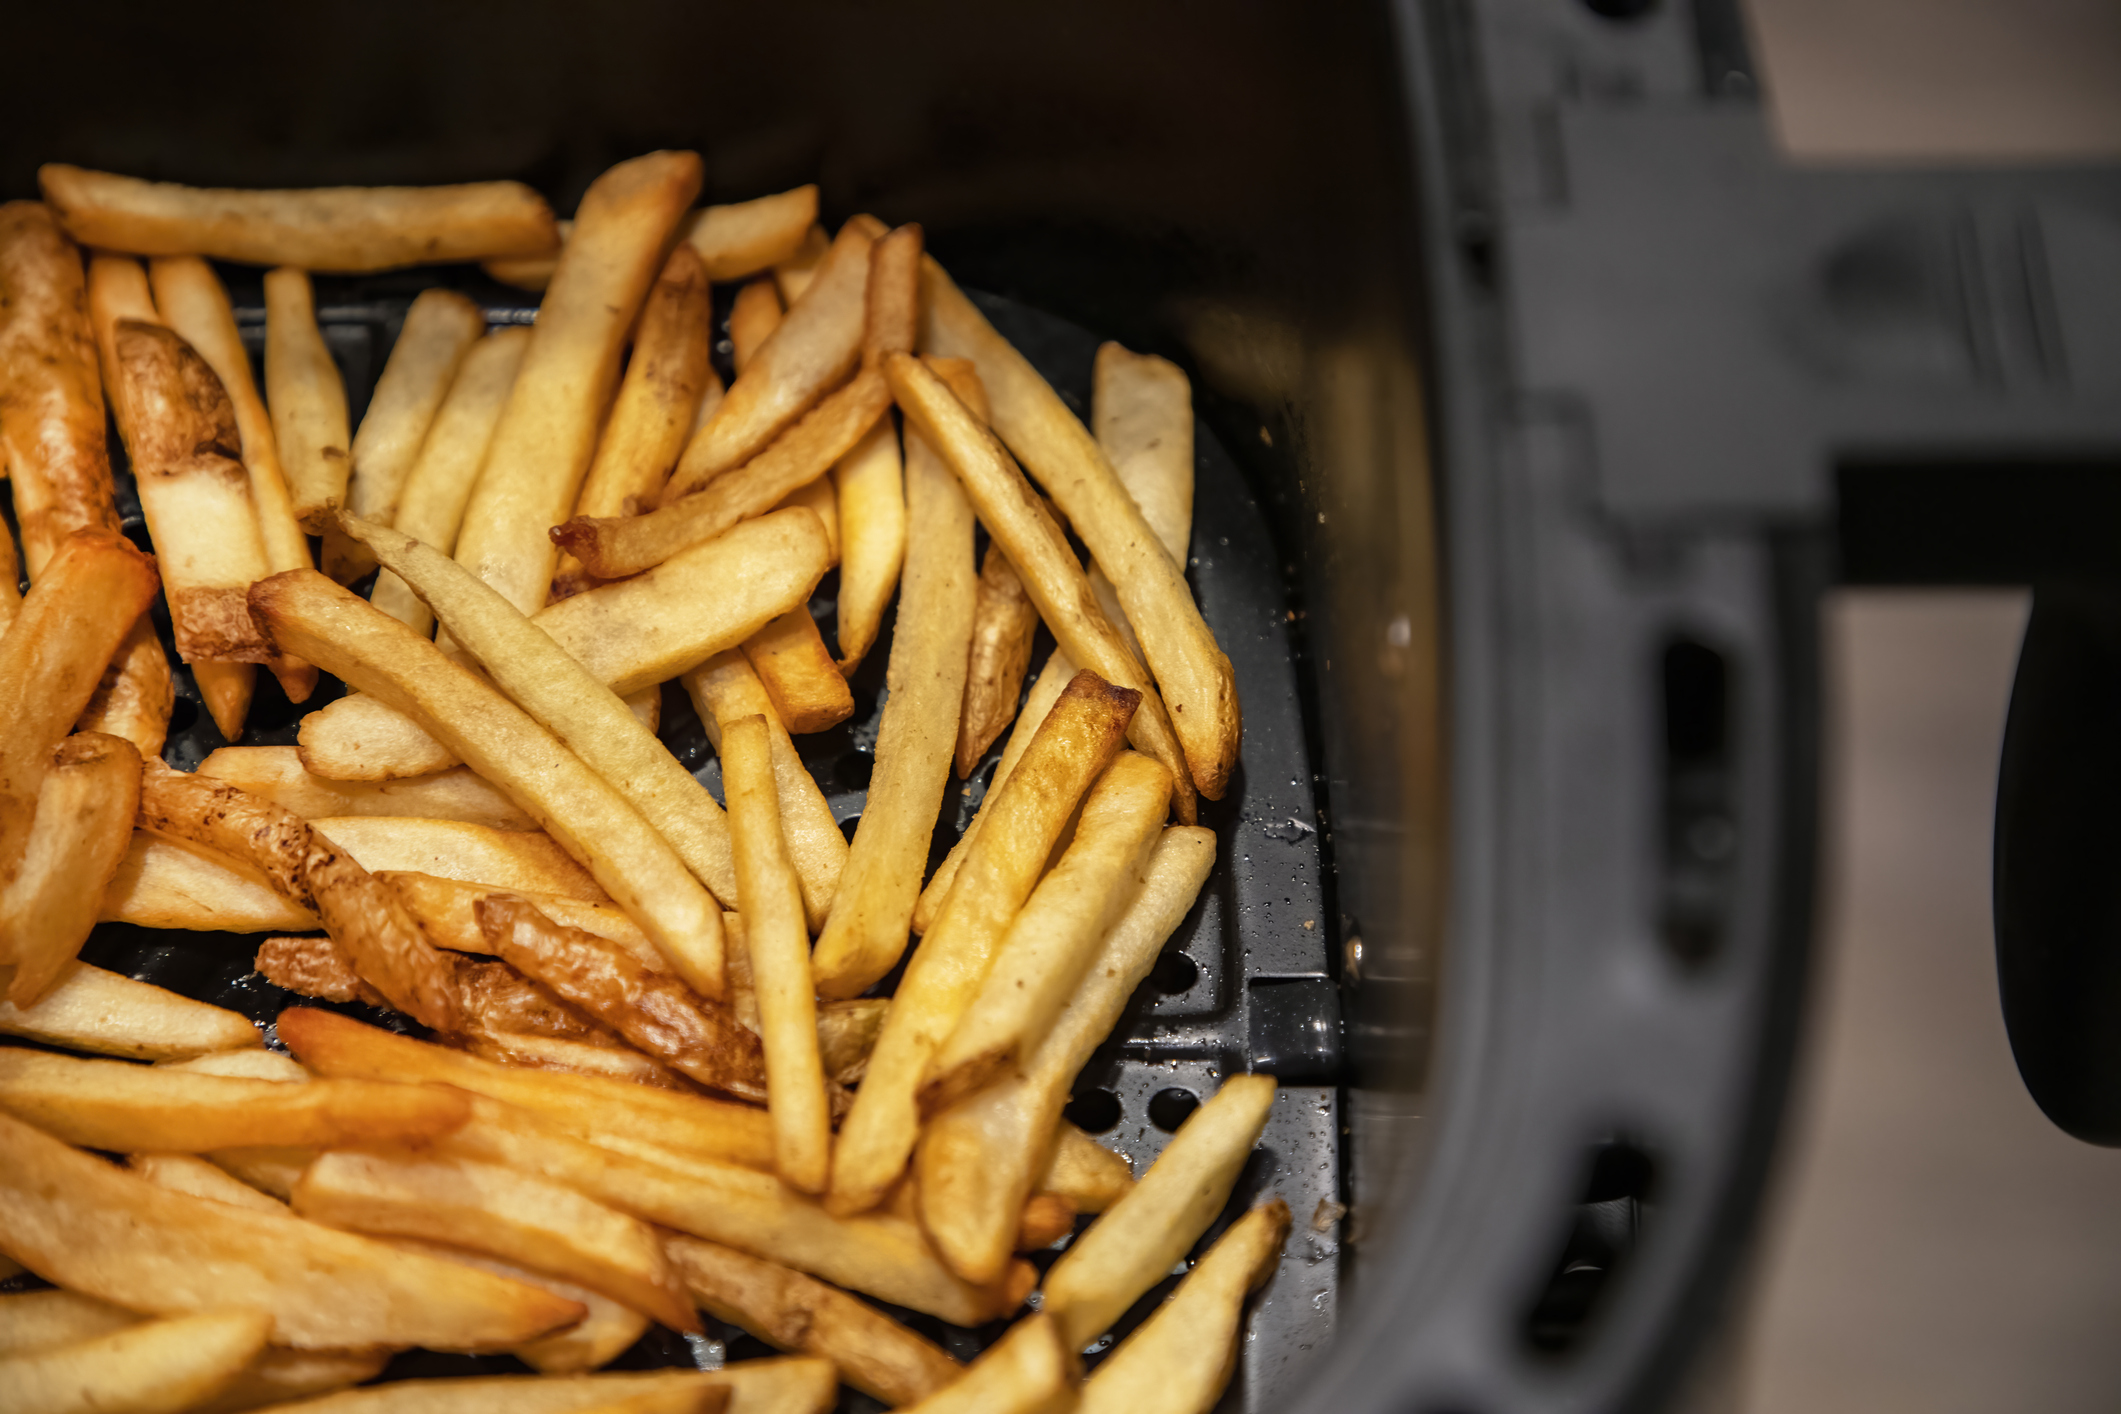 This step-by-step guide shows you how to clean an air fryer. Pictured: An air fryer with fries in the basket